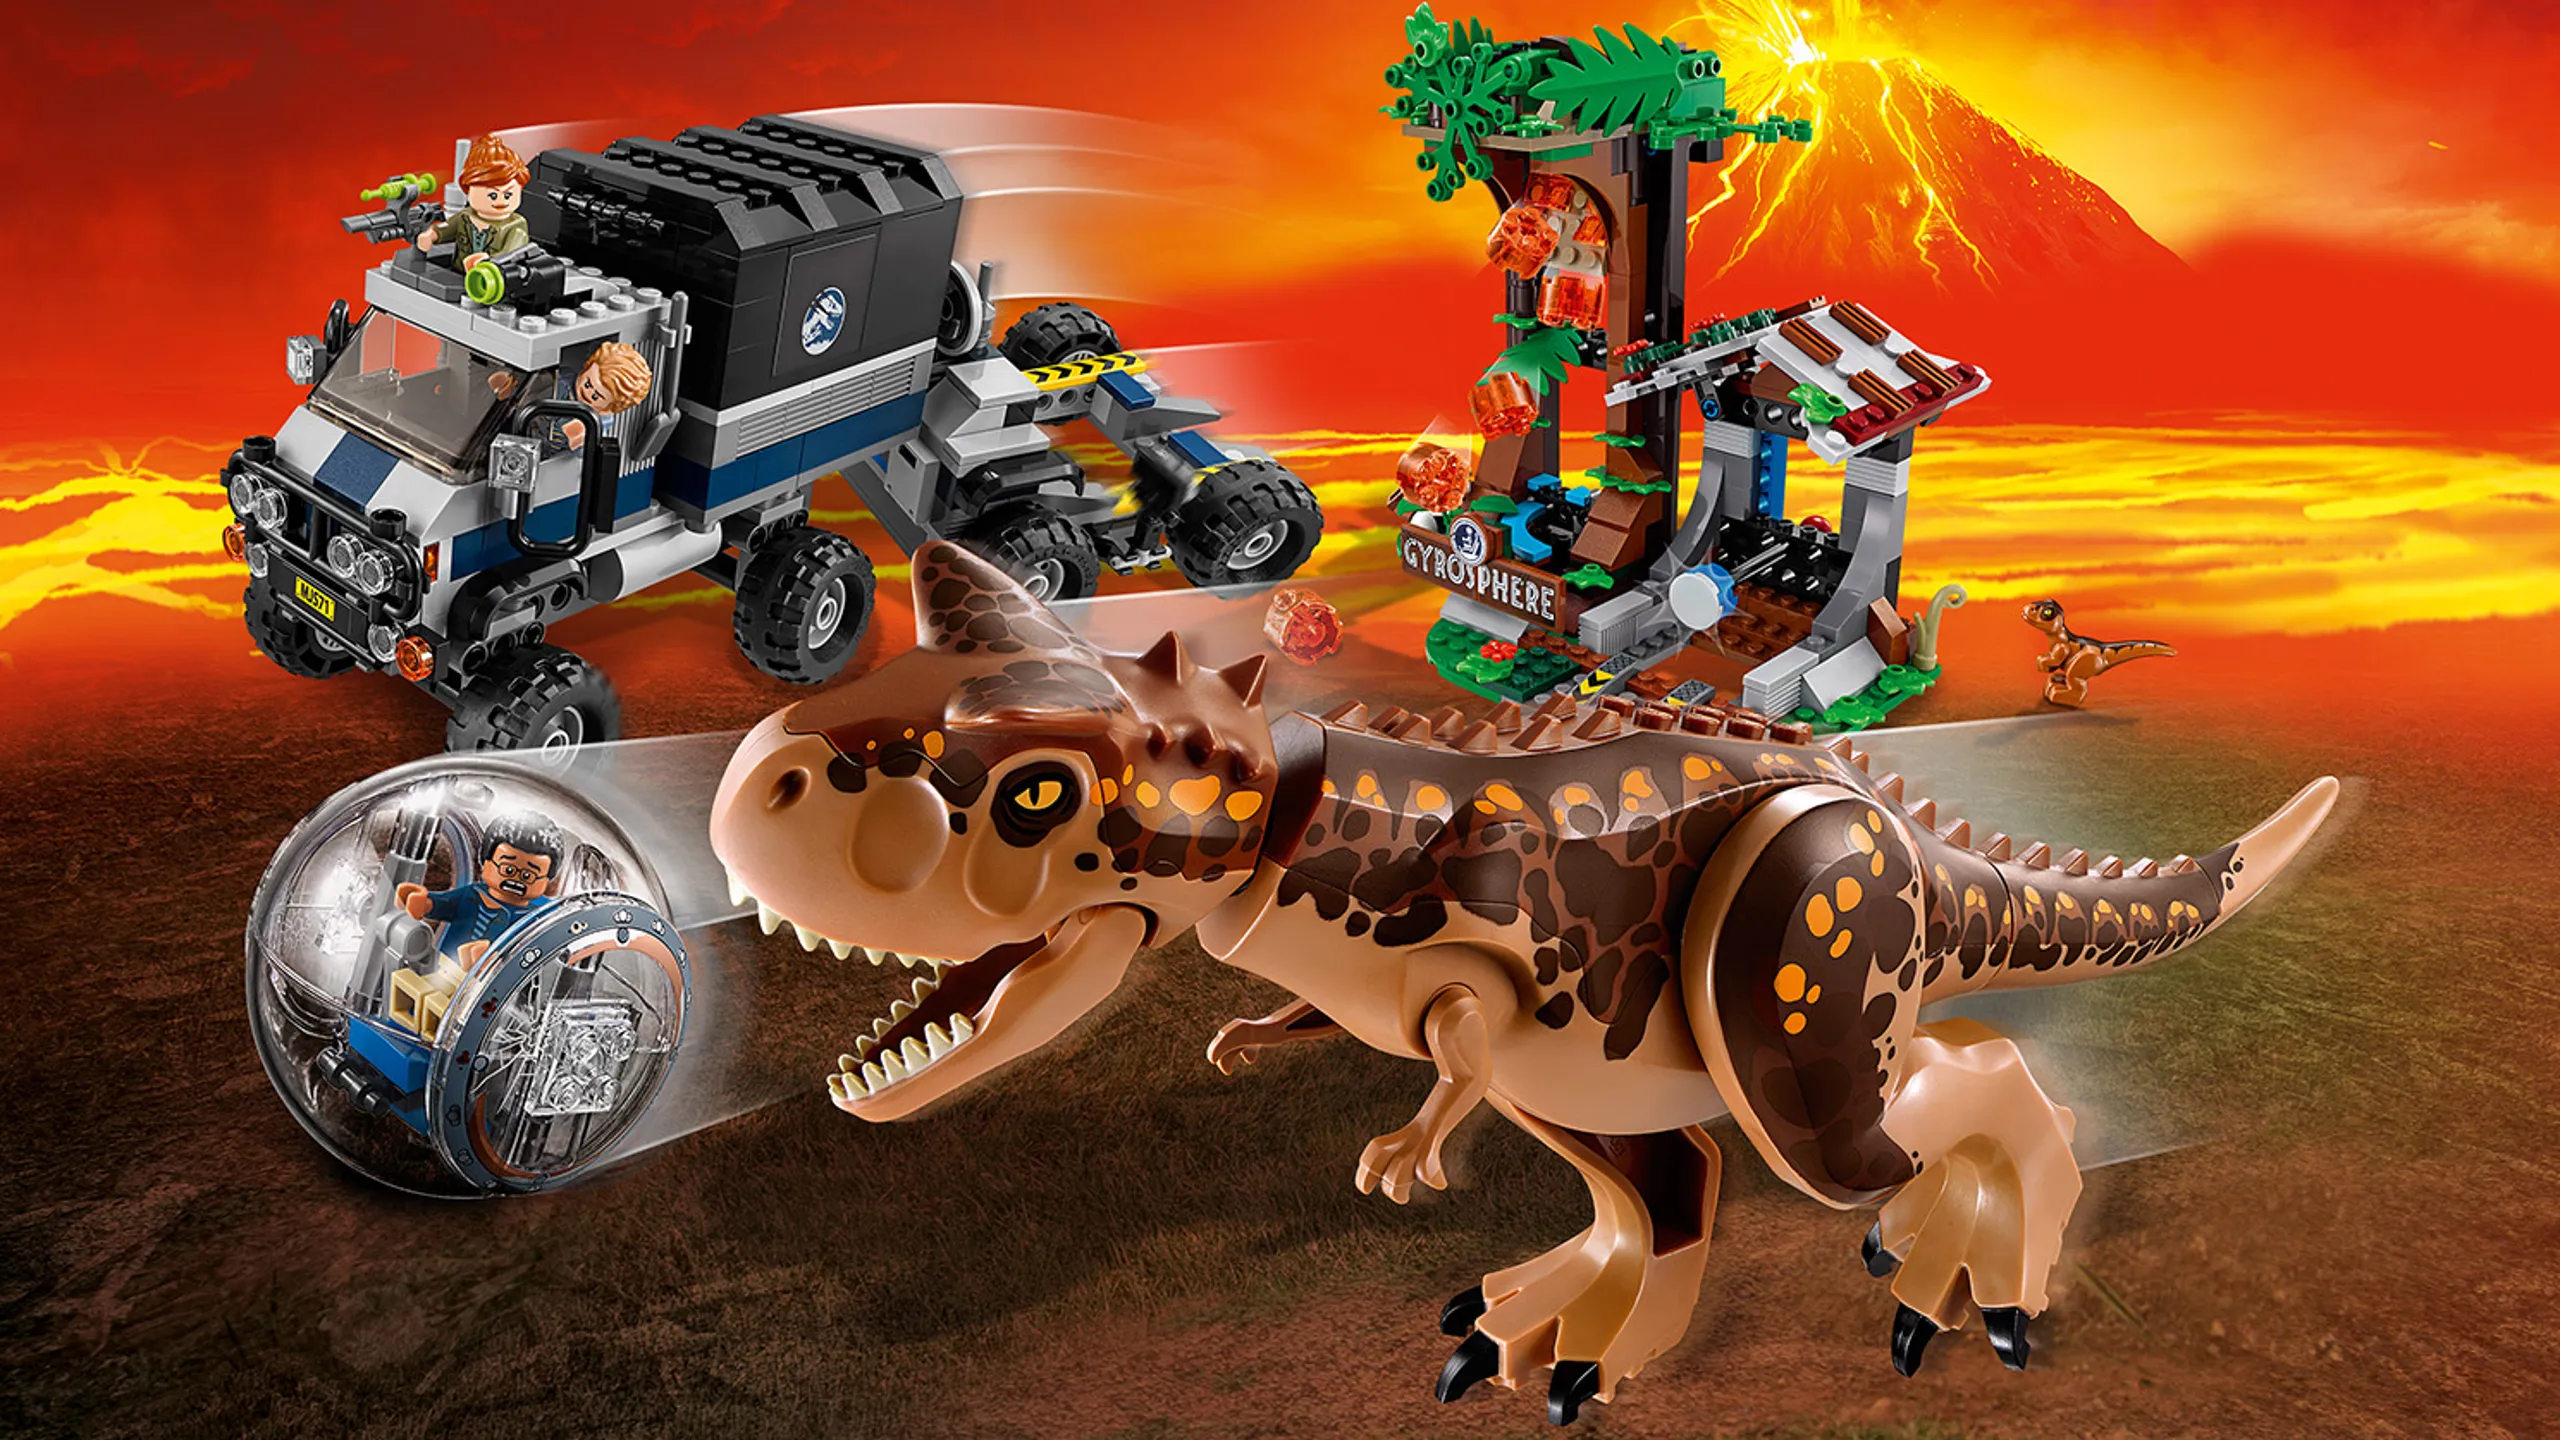 LEGO Jurassic World - 75929 Carnotaurus Gyrosphere Escape - The brown Carnotaurus is running after a scientist in the Gyrosphere and the other team members are racing along in a truck on the volcanic island.